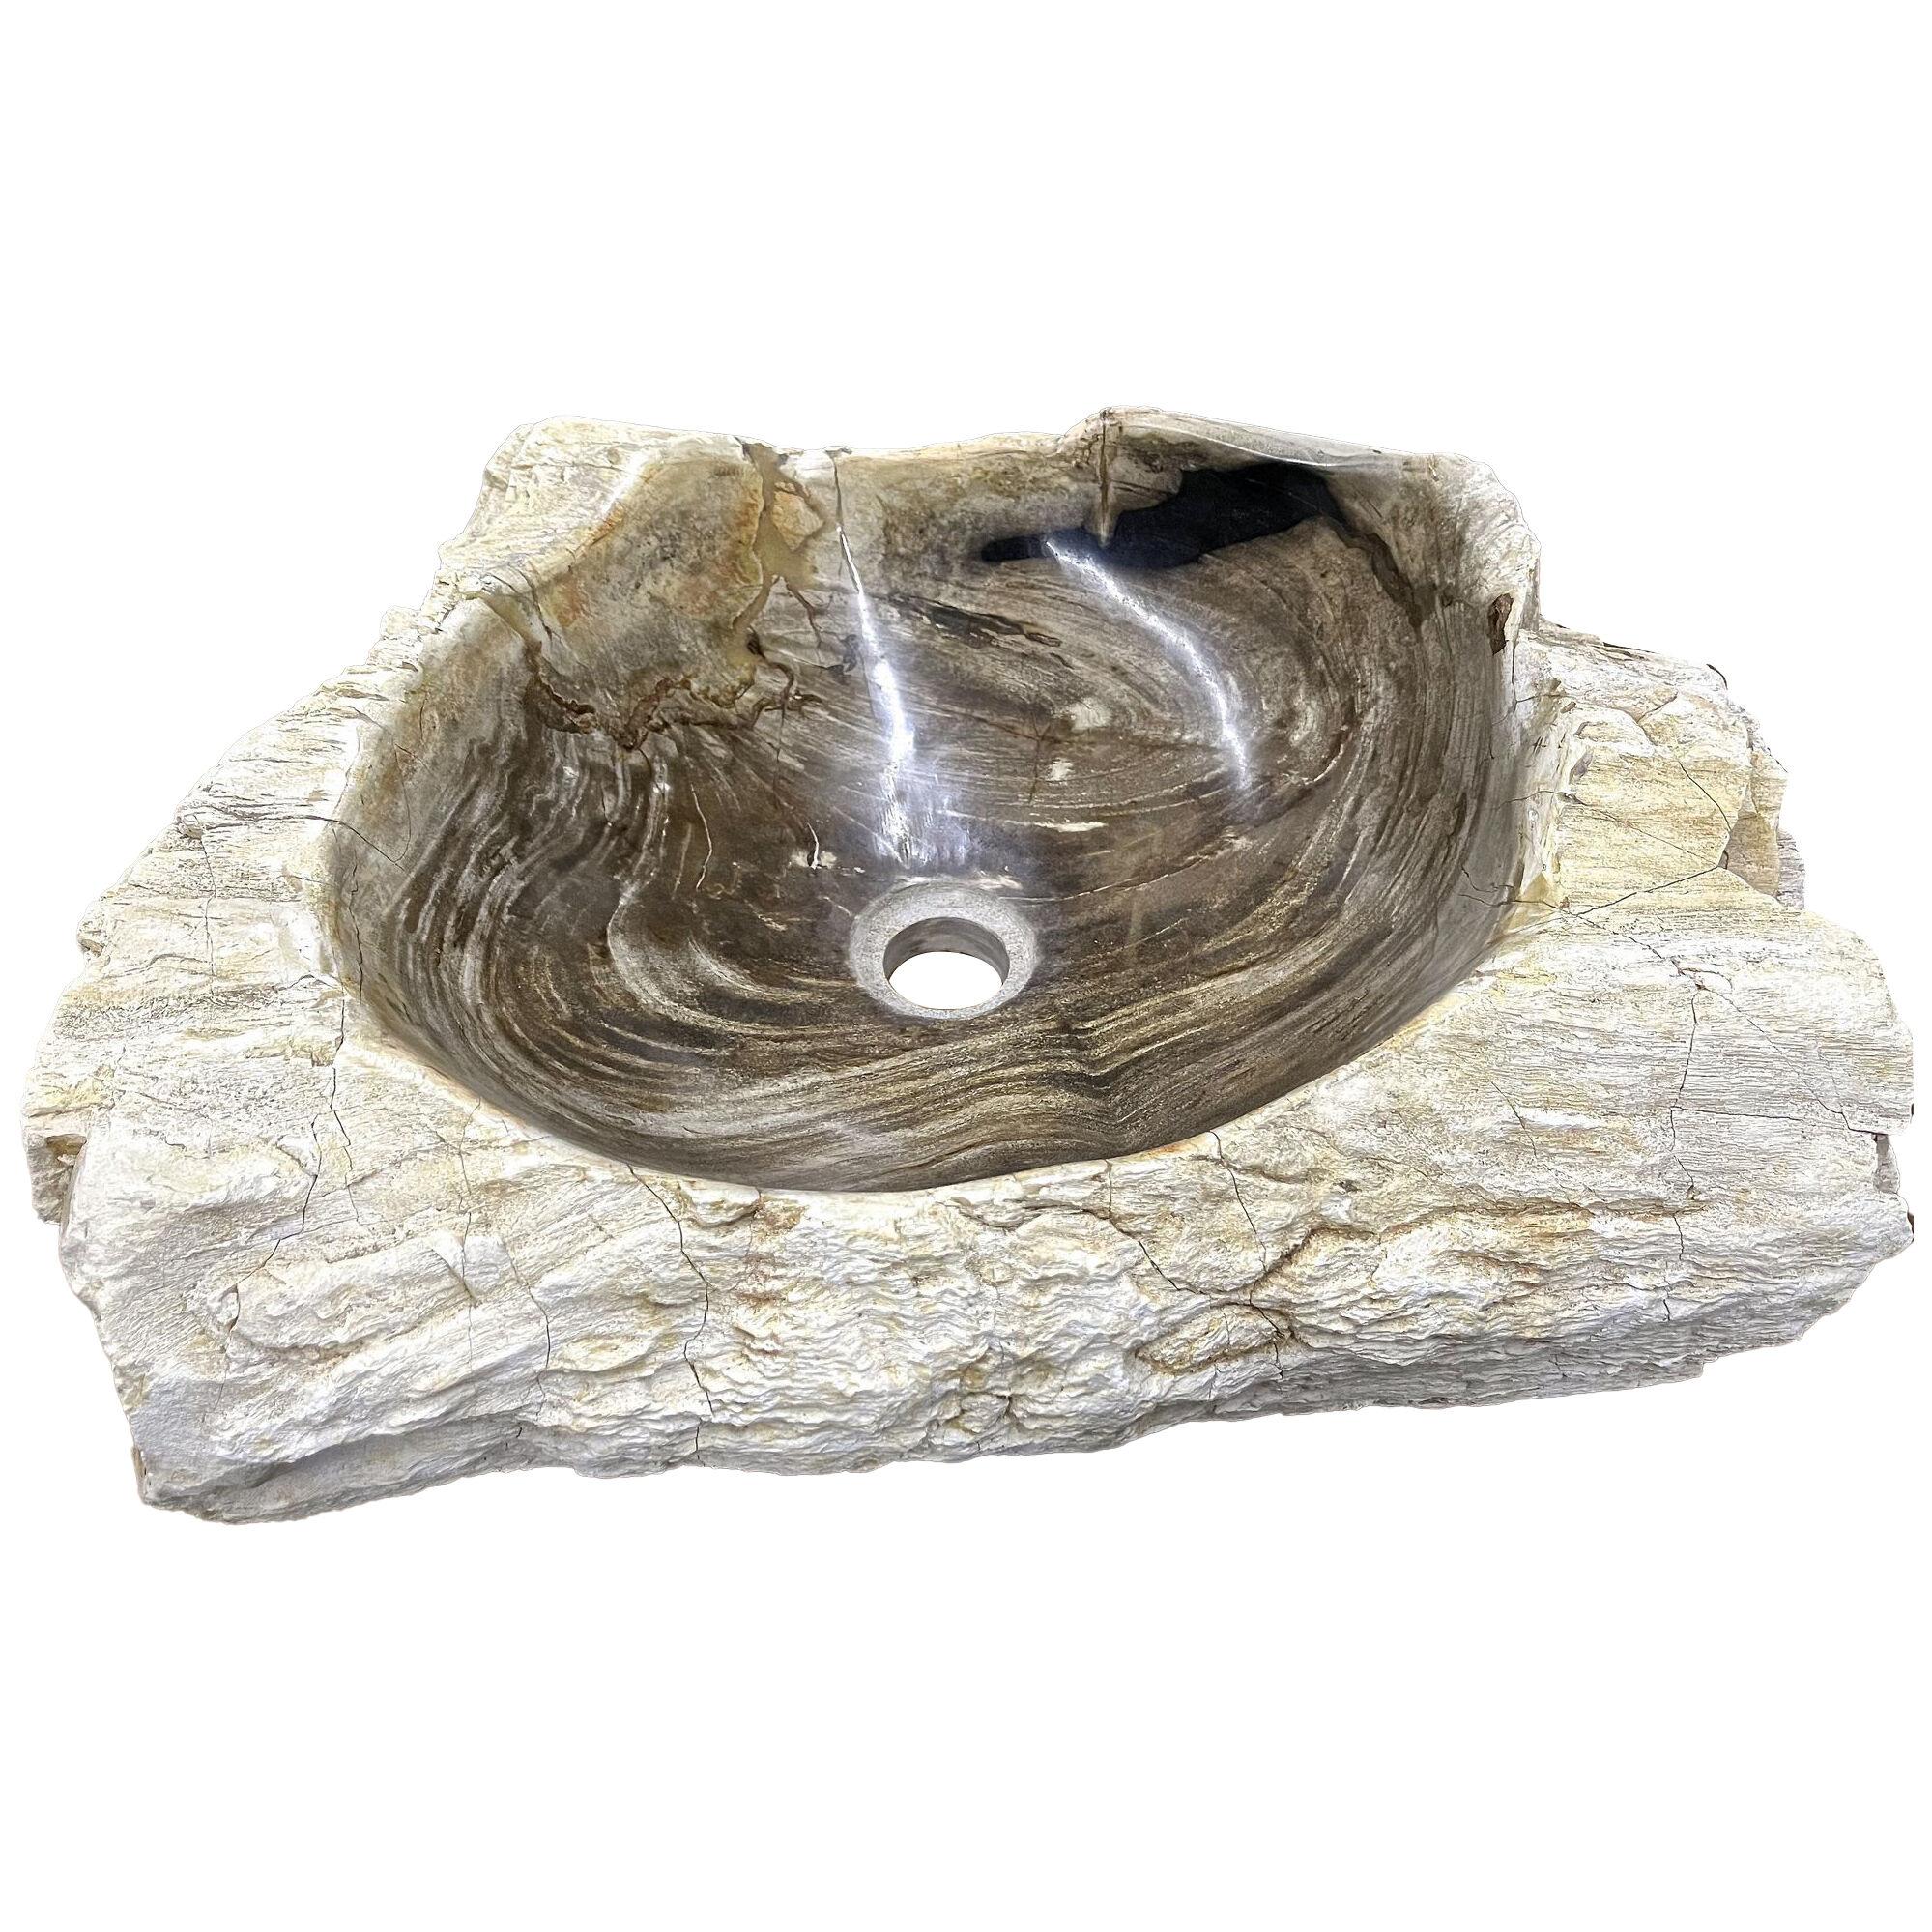 Petrified Wood Sink in Brown/ Grey/ Beige Tones, Polished, Top Quality